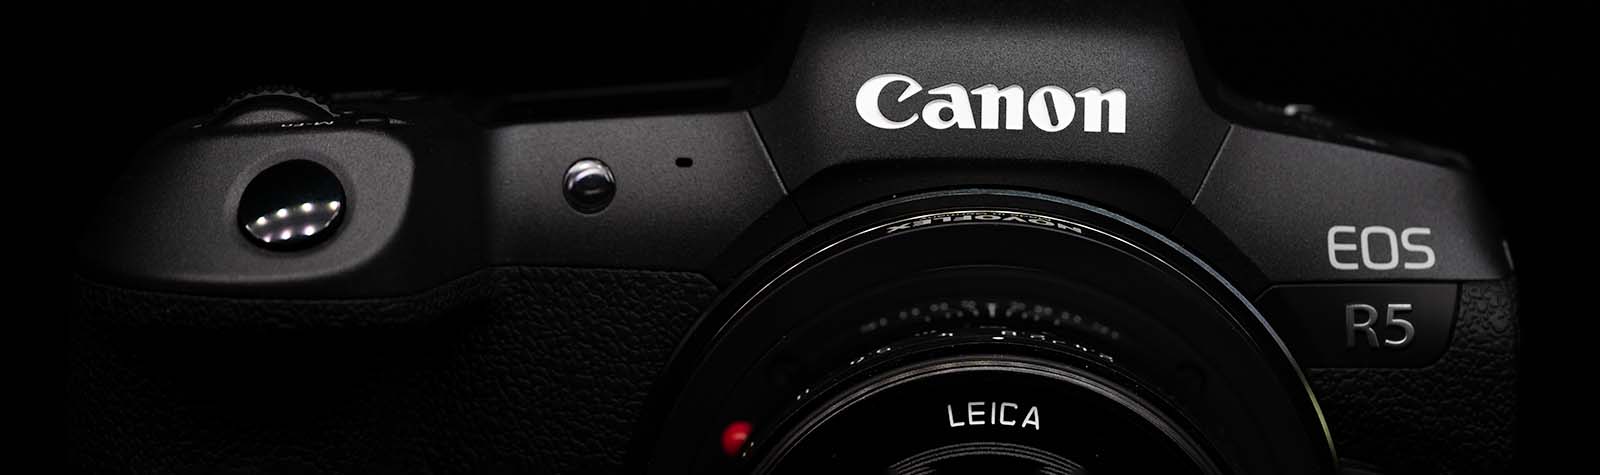 Using Leica and other rangefinder lenses on a Canon R5